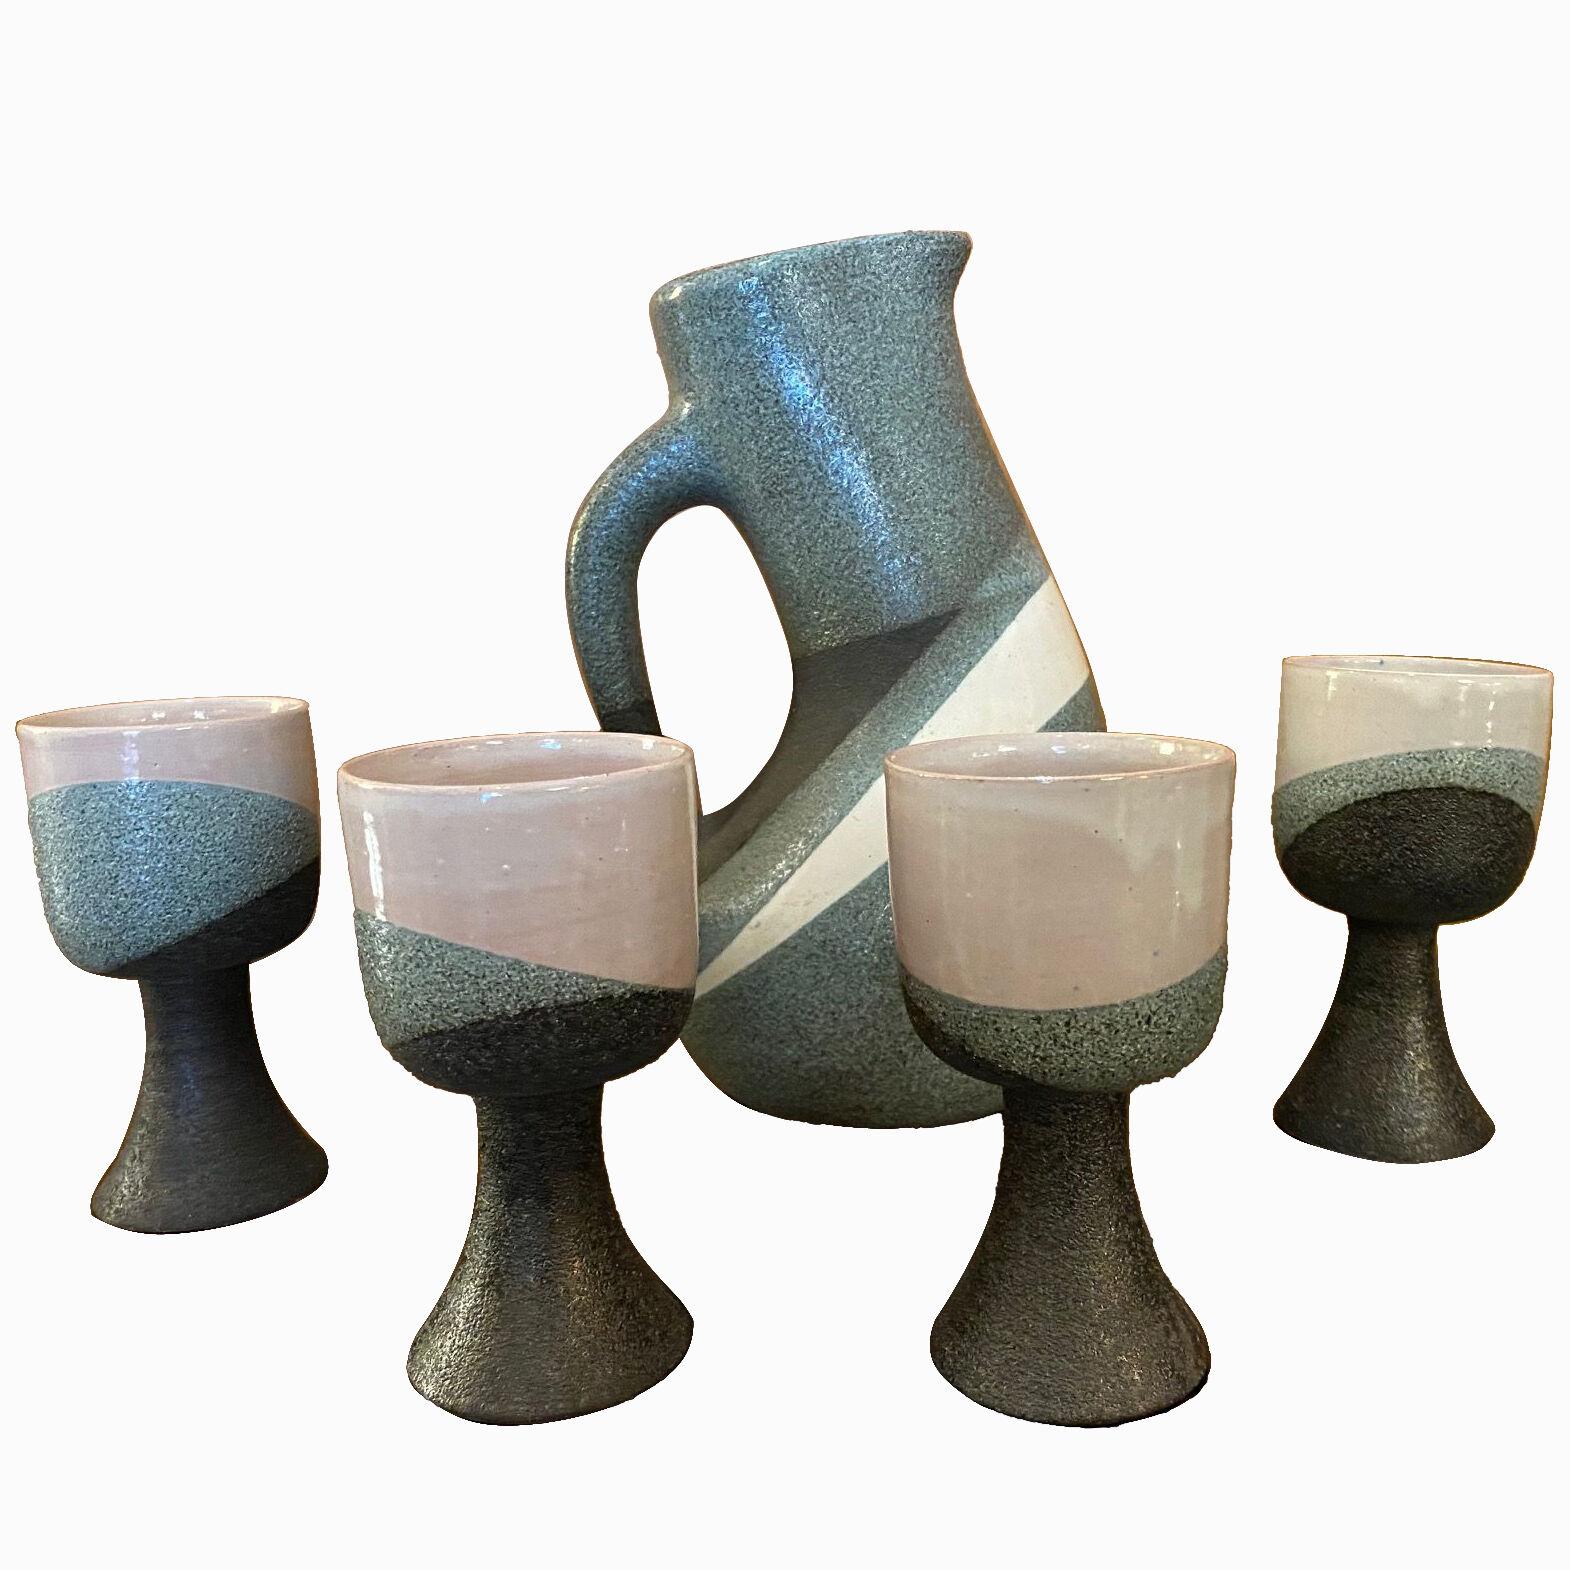 Ceramic jug and set of four cups/chalices by Gilbert Valentin, France, 1950s